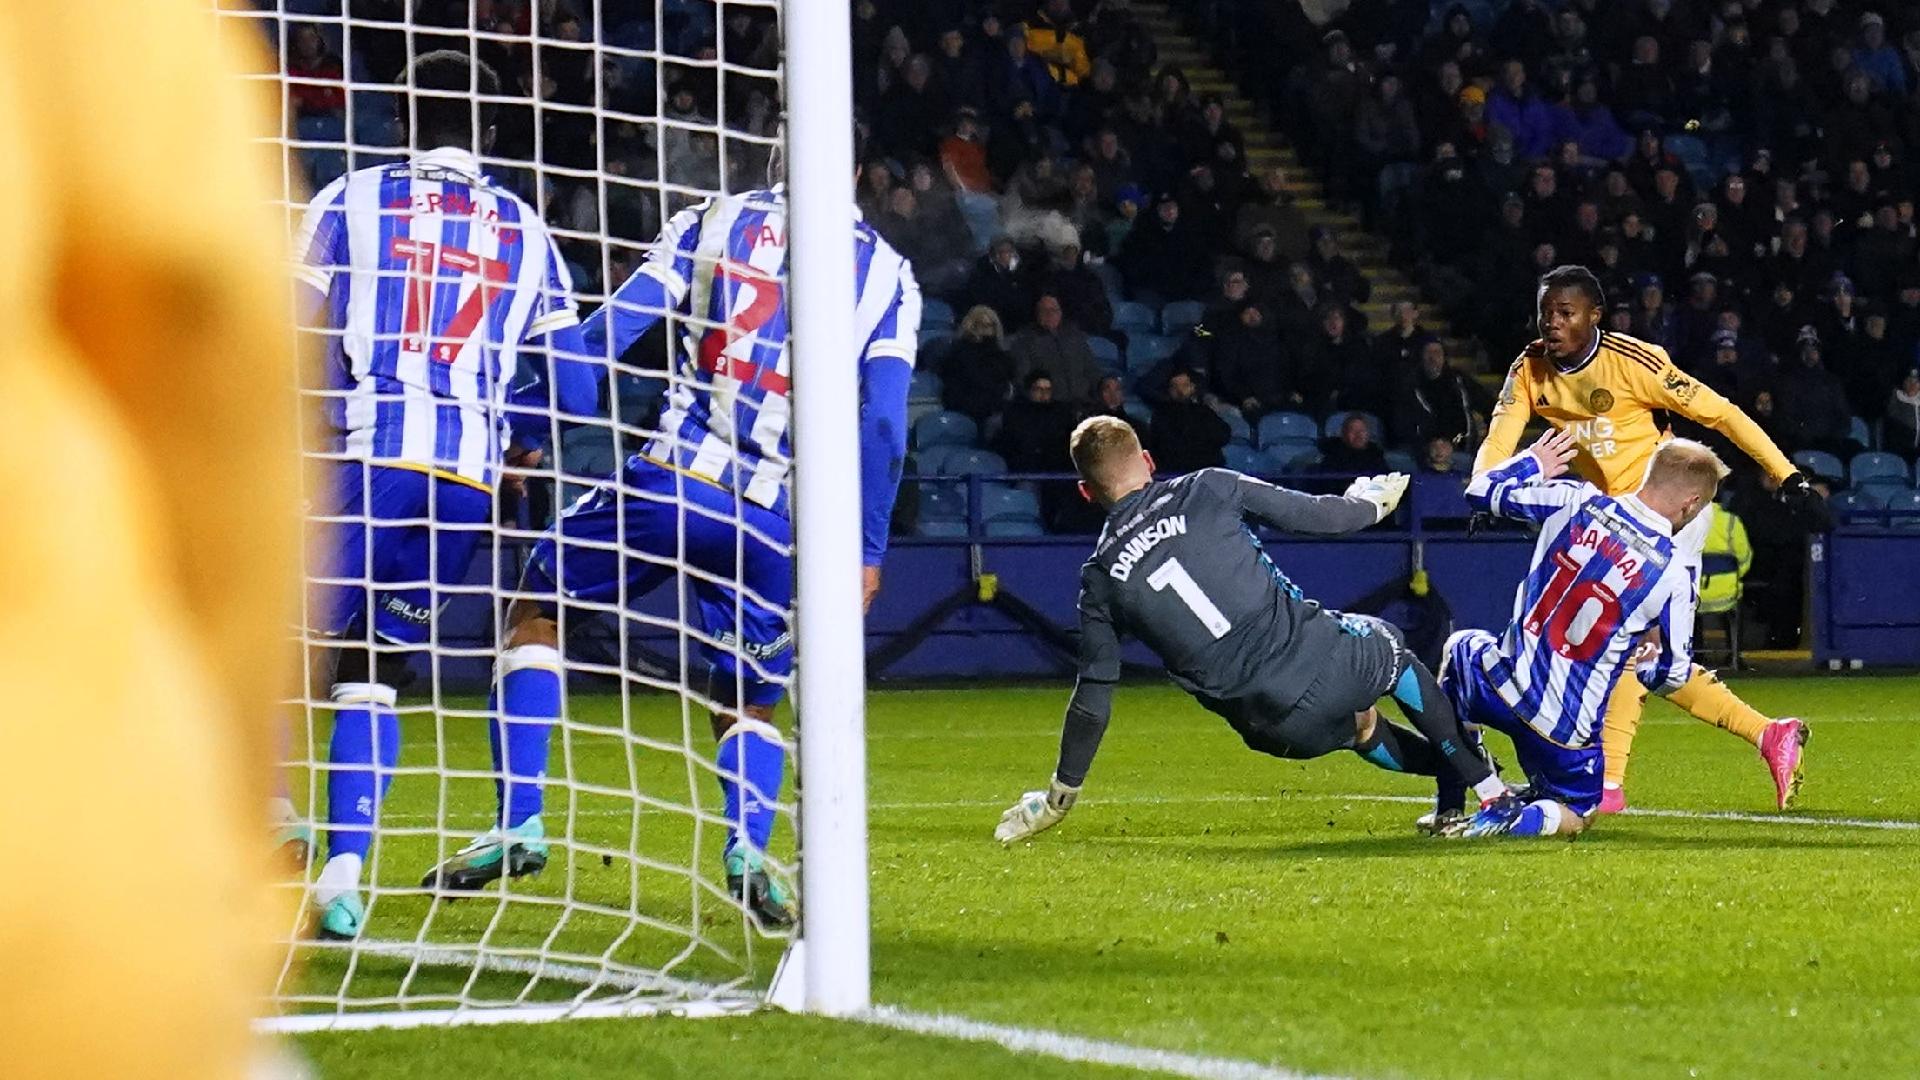 Rock-bottom Sheff Wed snatch stoppage-time equaliser against leaders Leicester